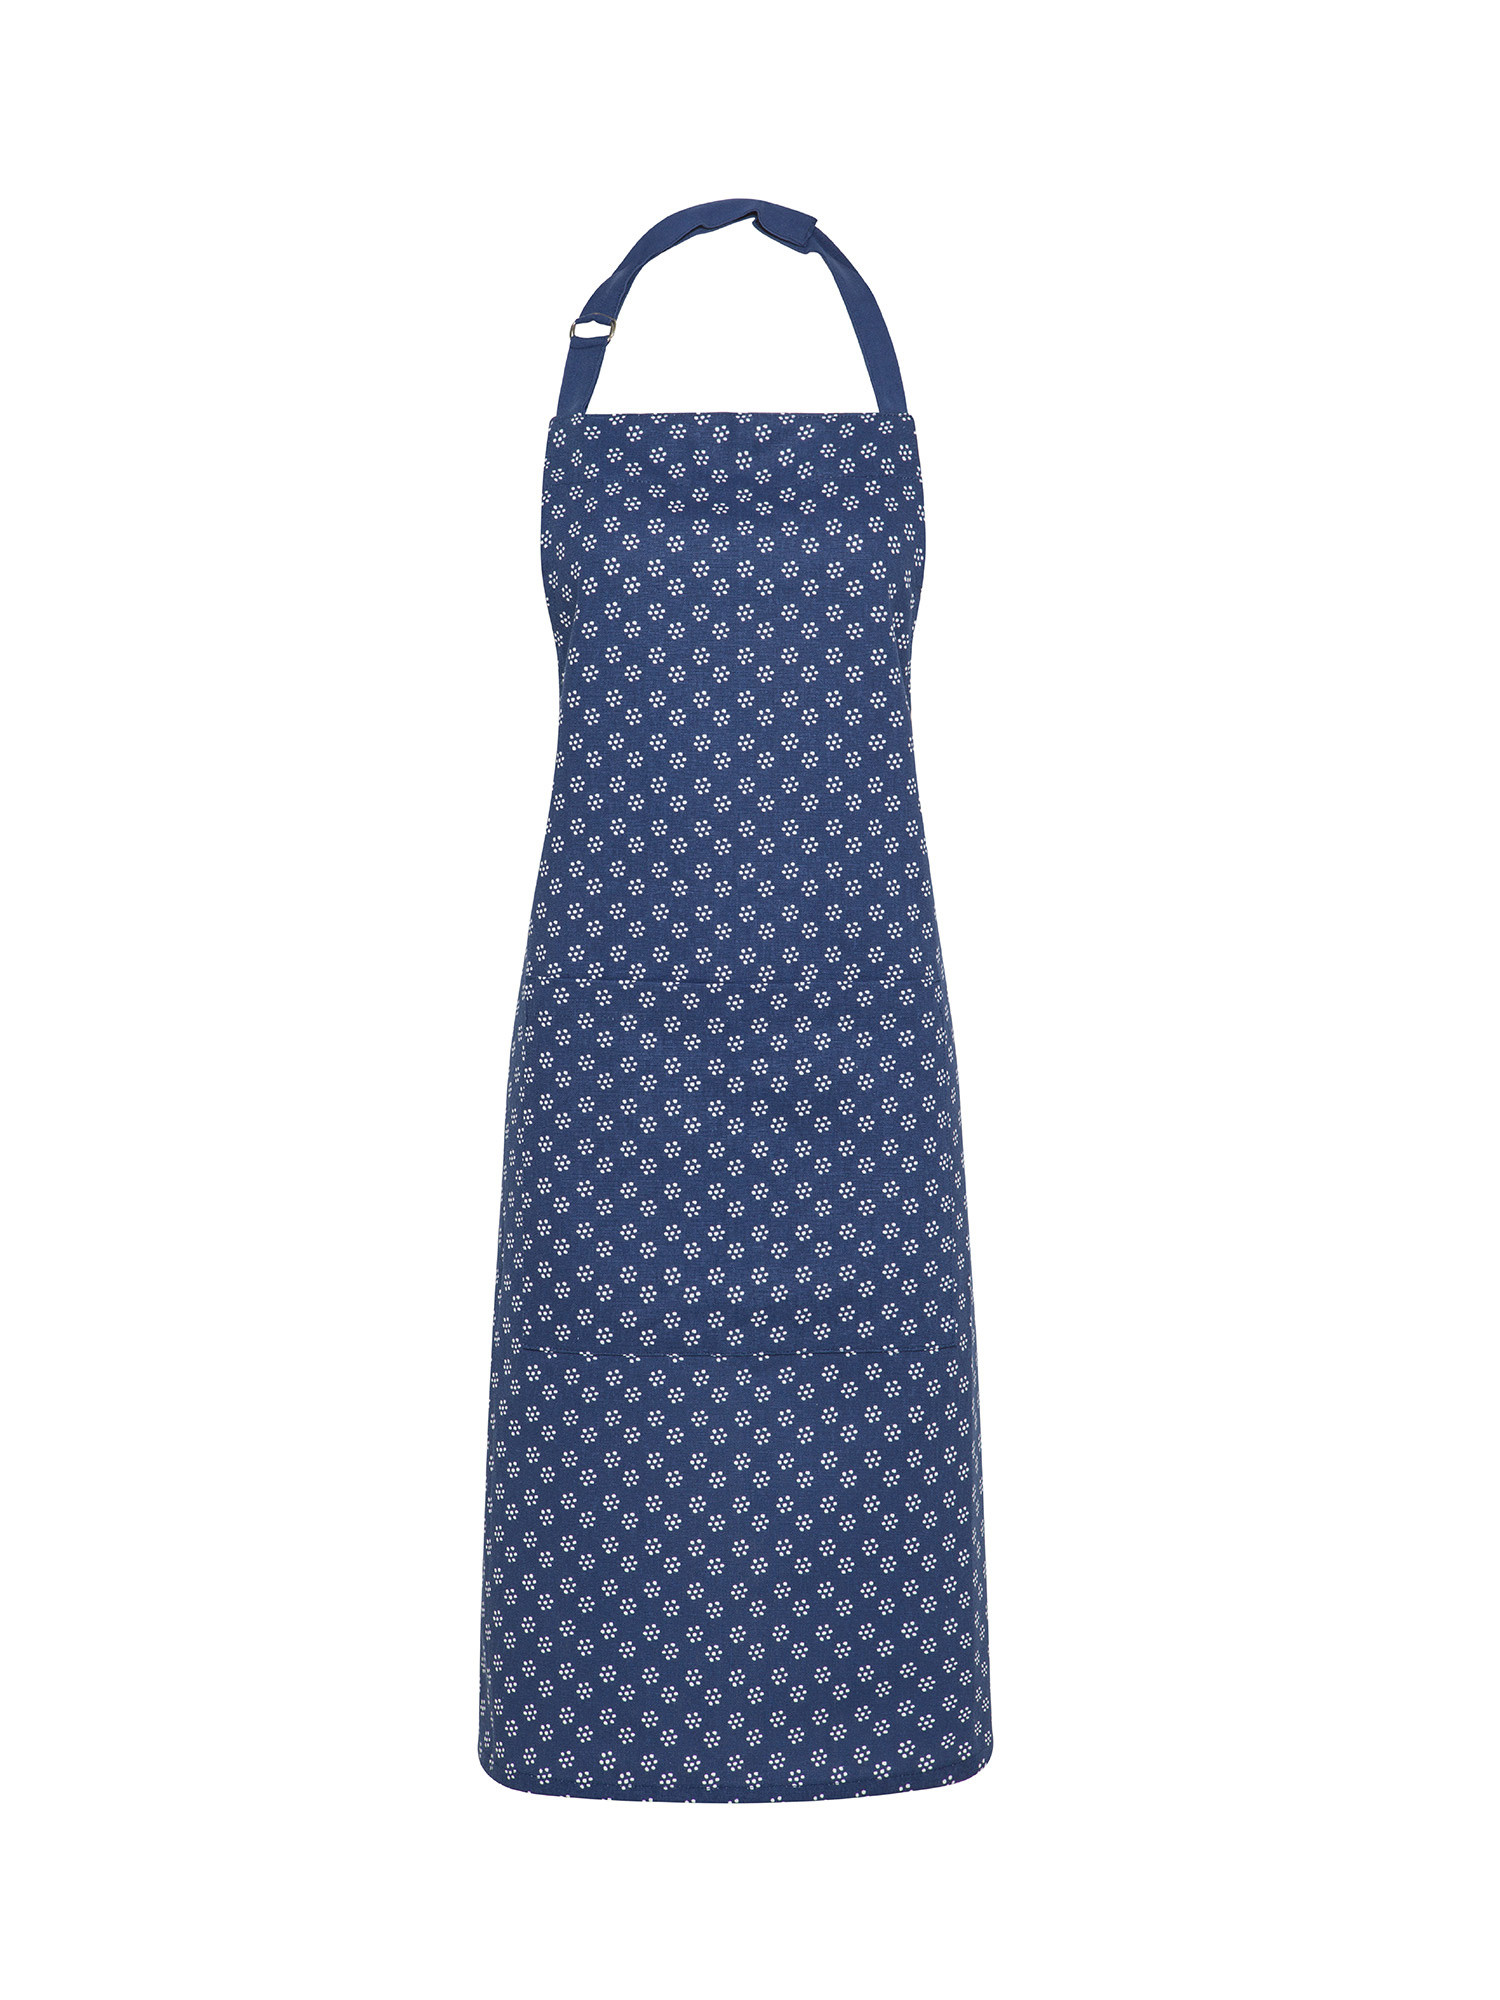 100% cotton kitchen apron with dots print, Blue, large image number 0